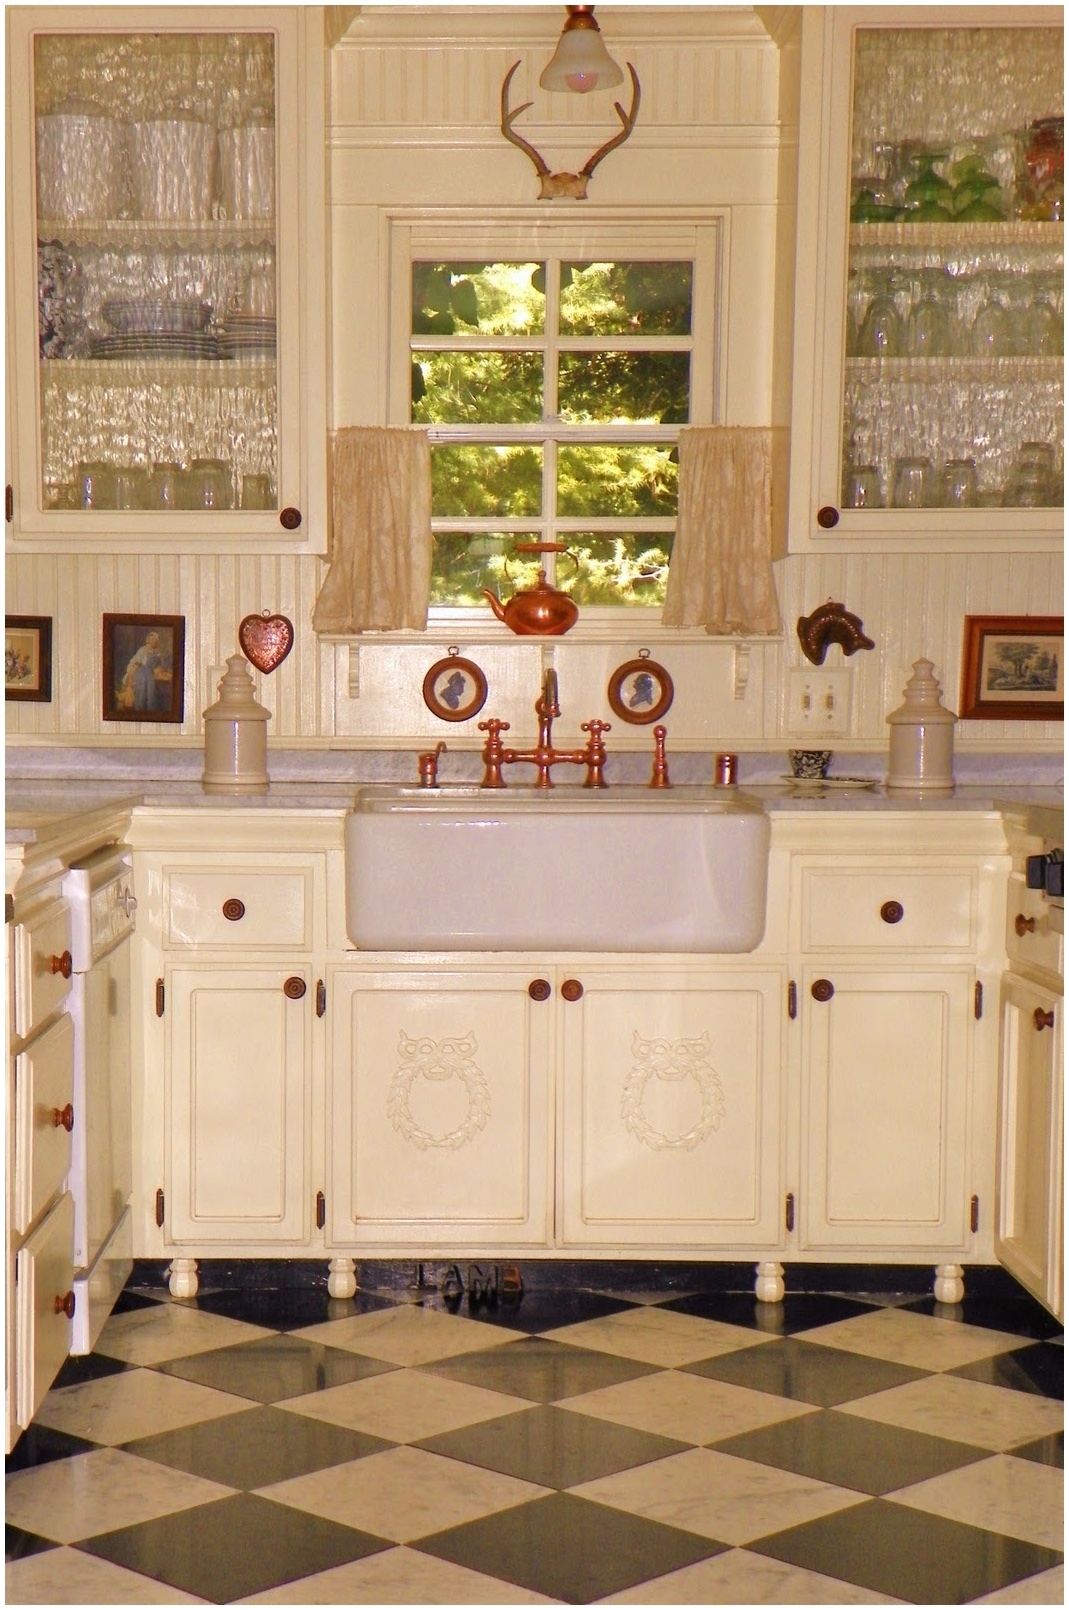 Kitchen incredible old fashioned kitchen sinks for kitchen decoration 1